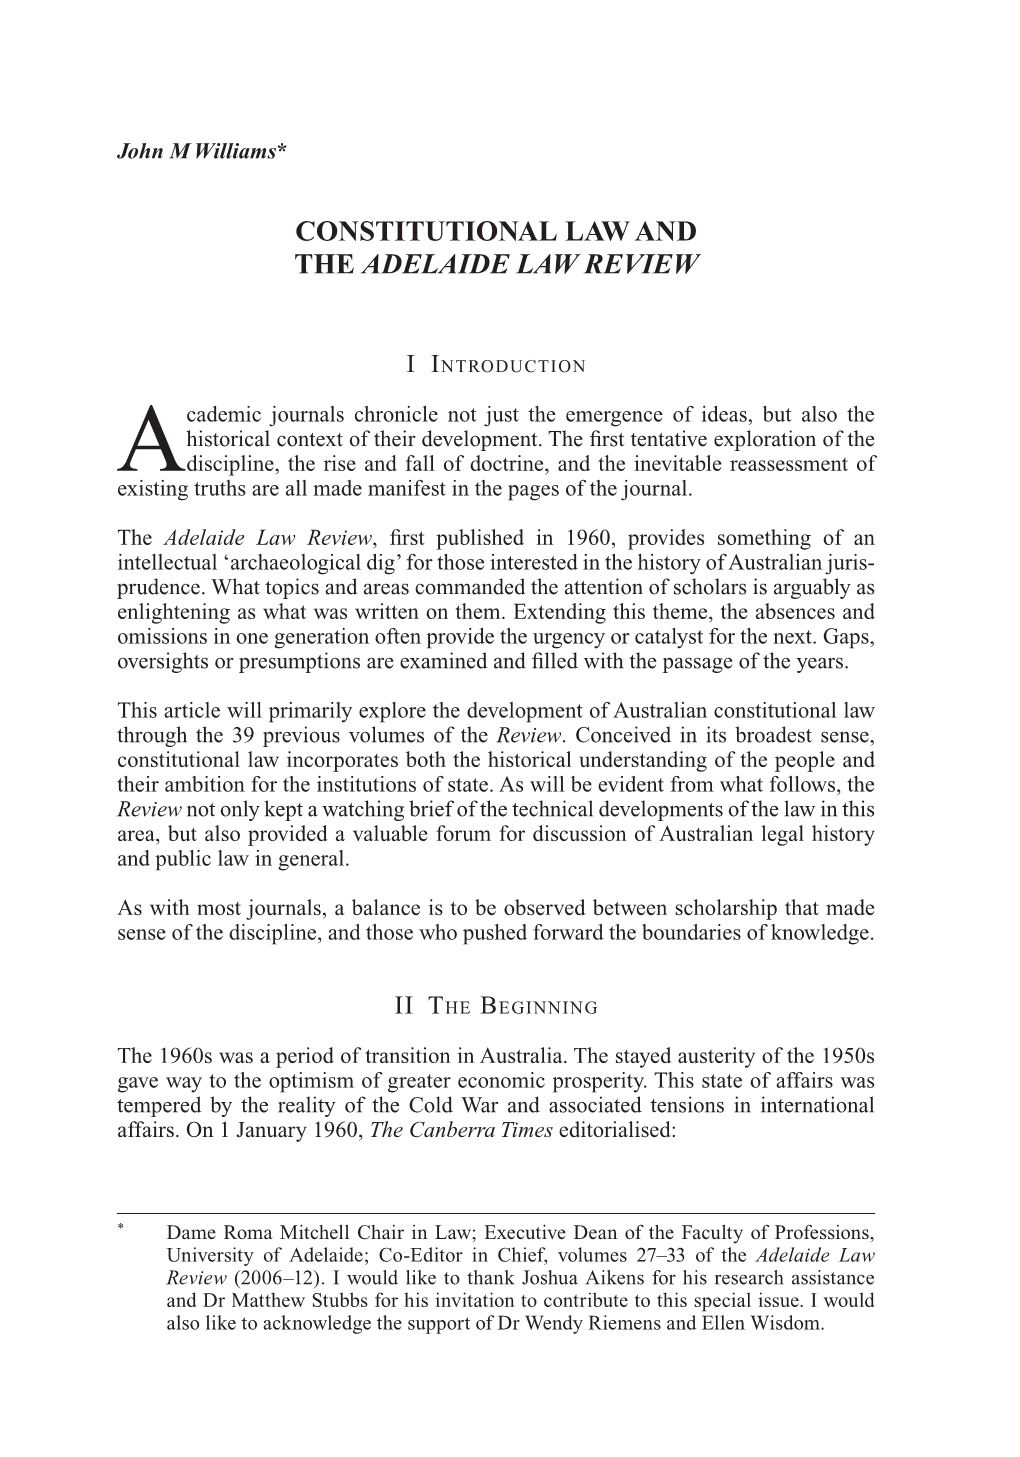 Constitutional Law and the Adelaide Law Review